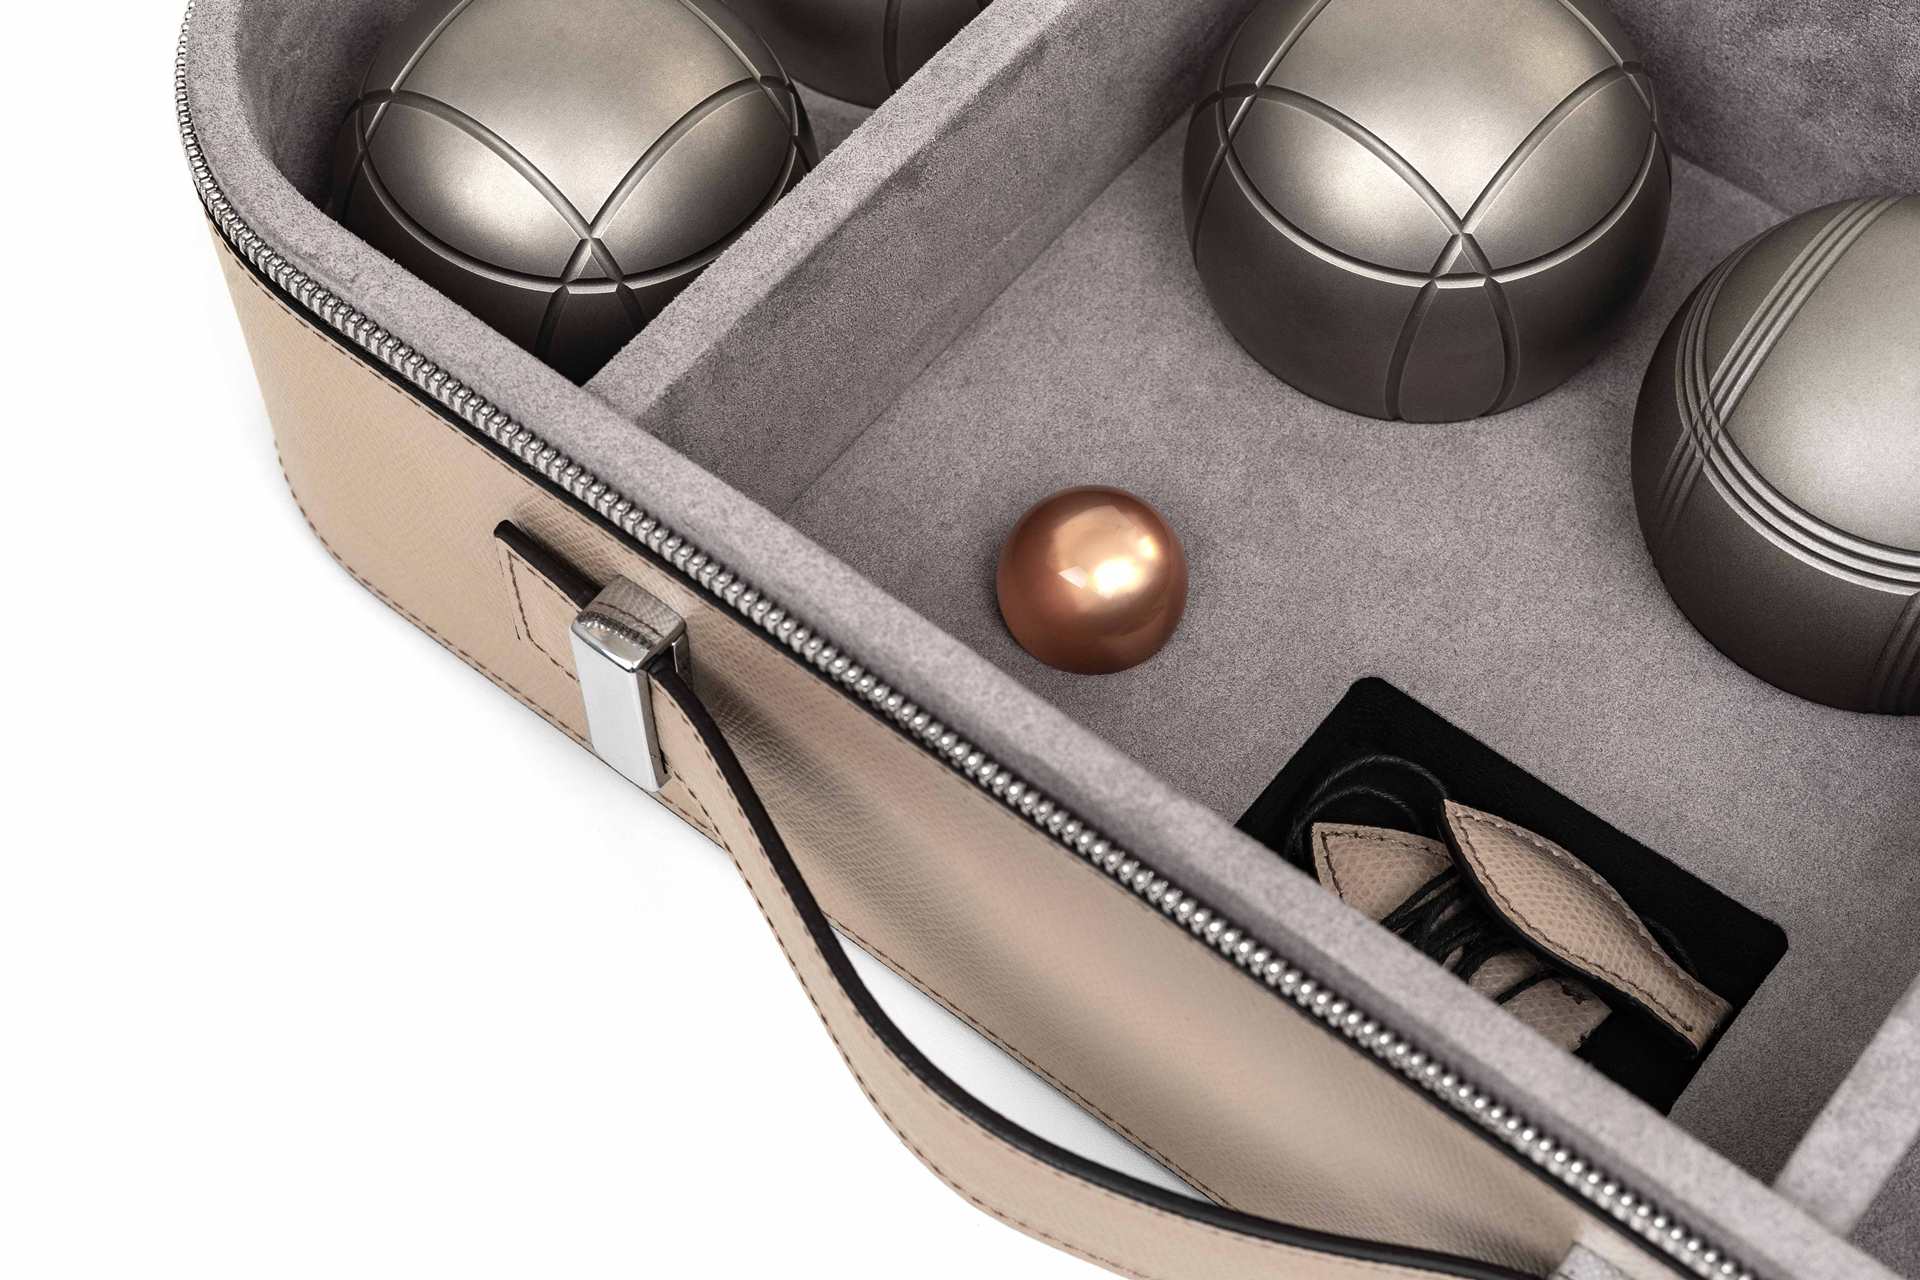 Pinetti Petanque Game Set in Leather-Covered Case | A complete game set of 6 metal balls with one jack and a leather measuring rope | Portable Pétanque game set comes with its own sleek storage box, completely covered with genuine grained leather | Explore Luxury Game Sets at 2Jour Concierge, #1 luxury high-end gift & lifestyle shop